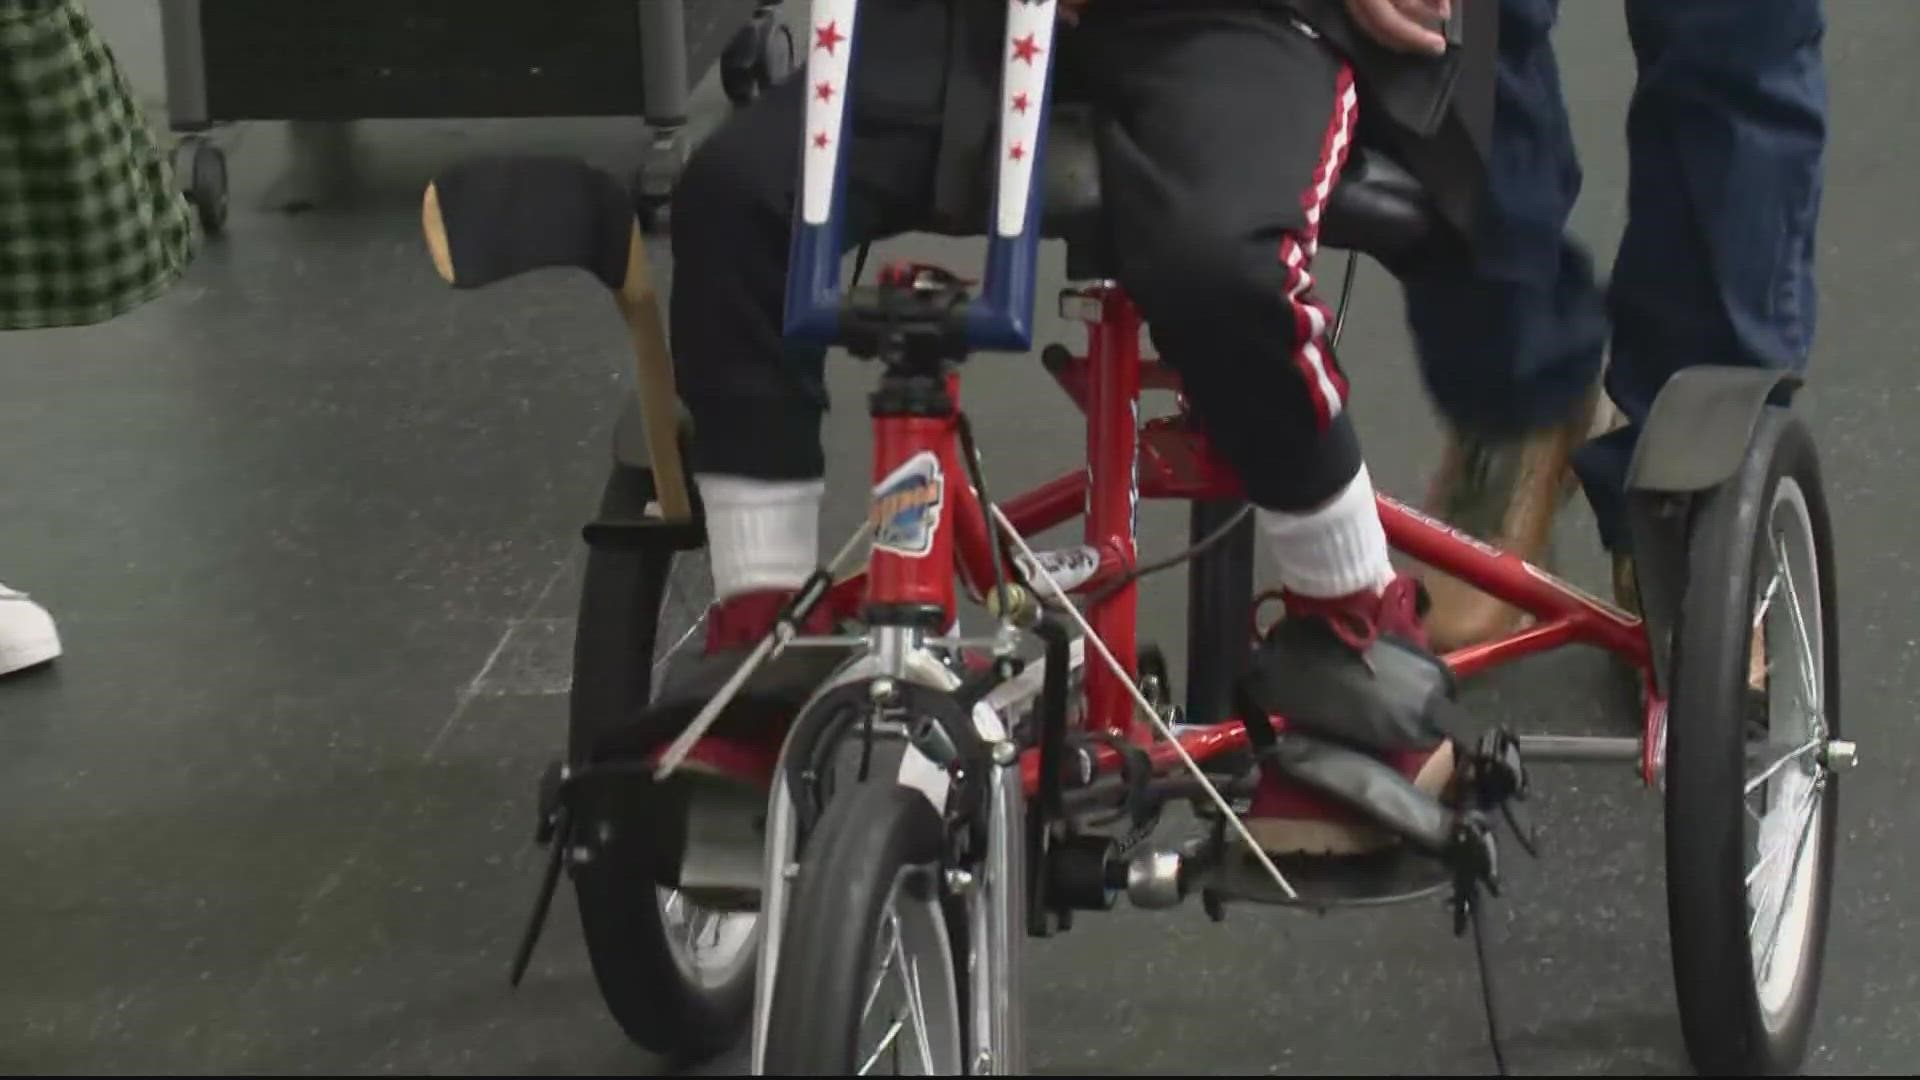 8-year-old Lamar Collado now has a fun new way to get around - a Capitals themed adaptive bike.